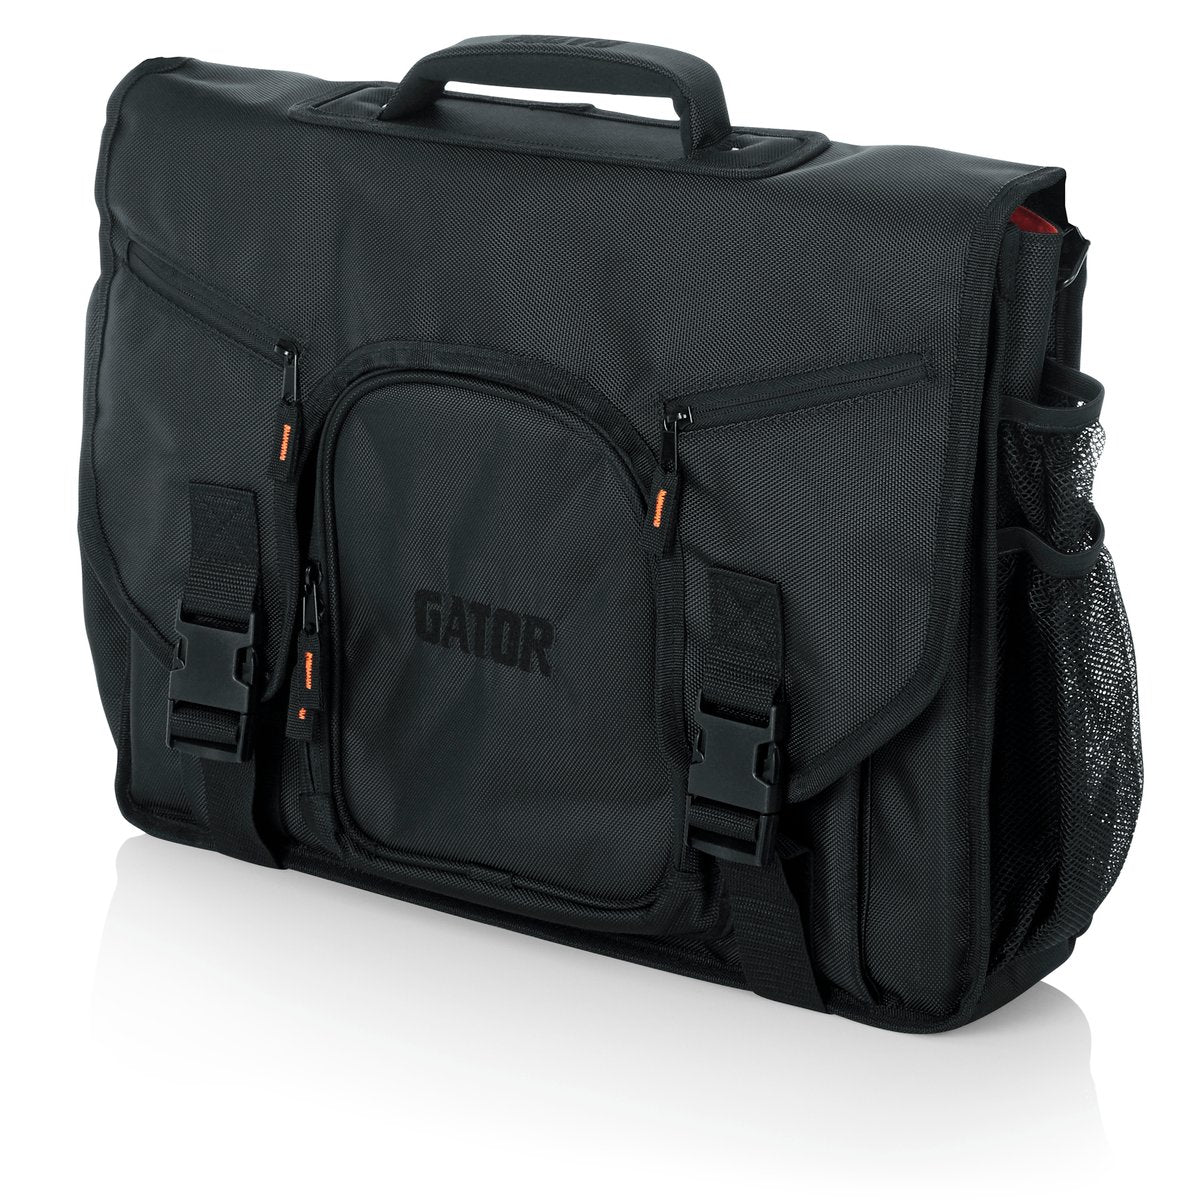 G-Club Series Messenger Style Bag to hold Laptop based DJ midi Controllers up to 19", laptop, and headphones